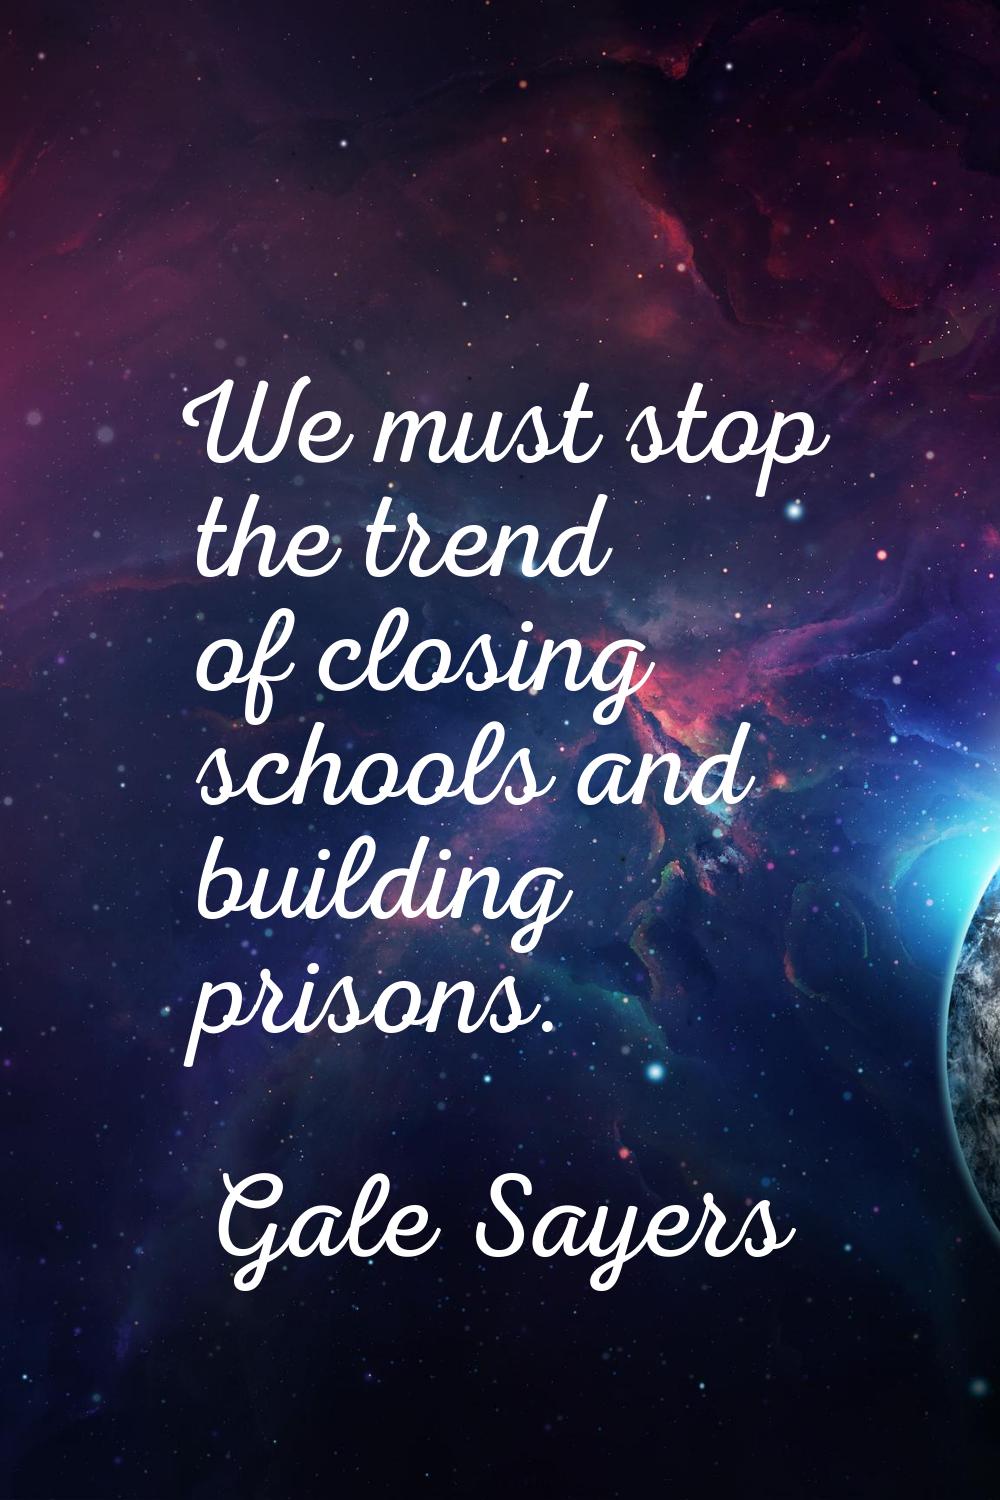 We must stop the trend of closing schools and building prisons.